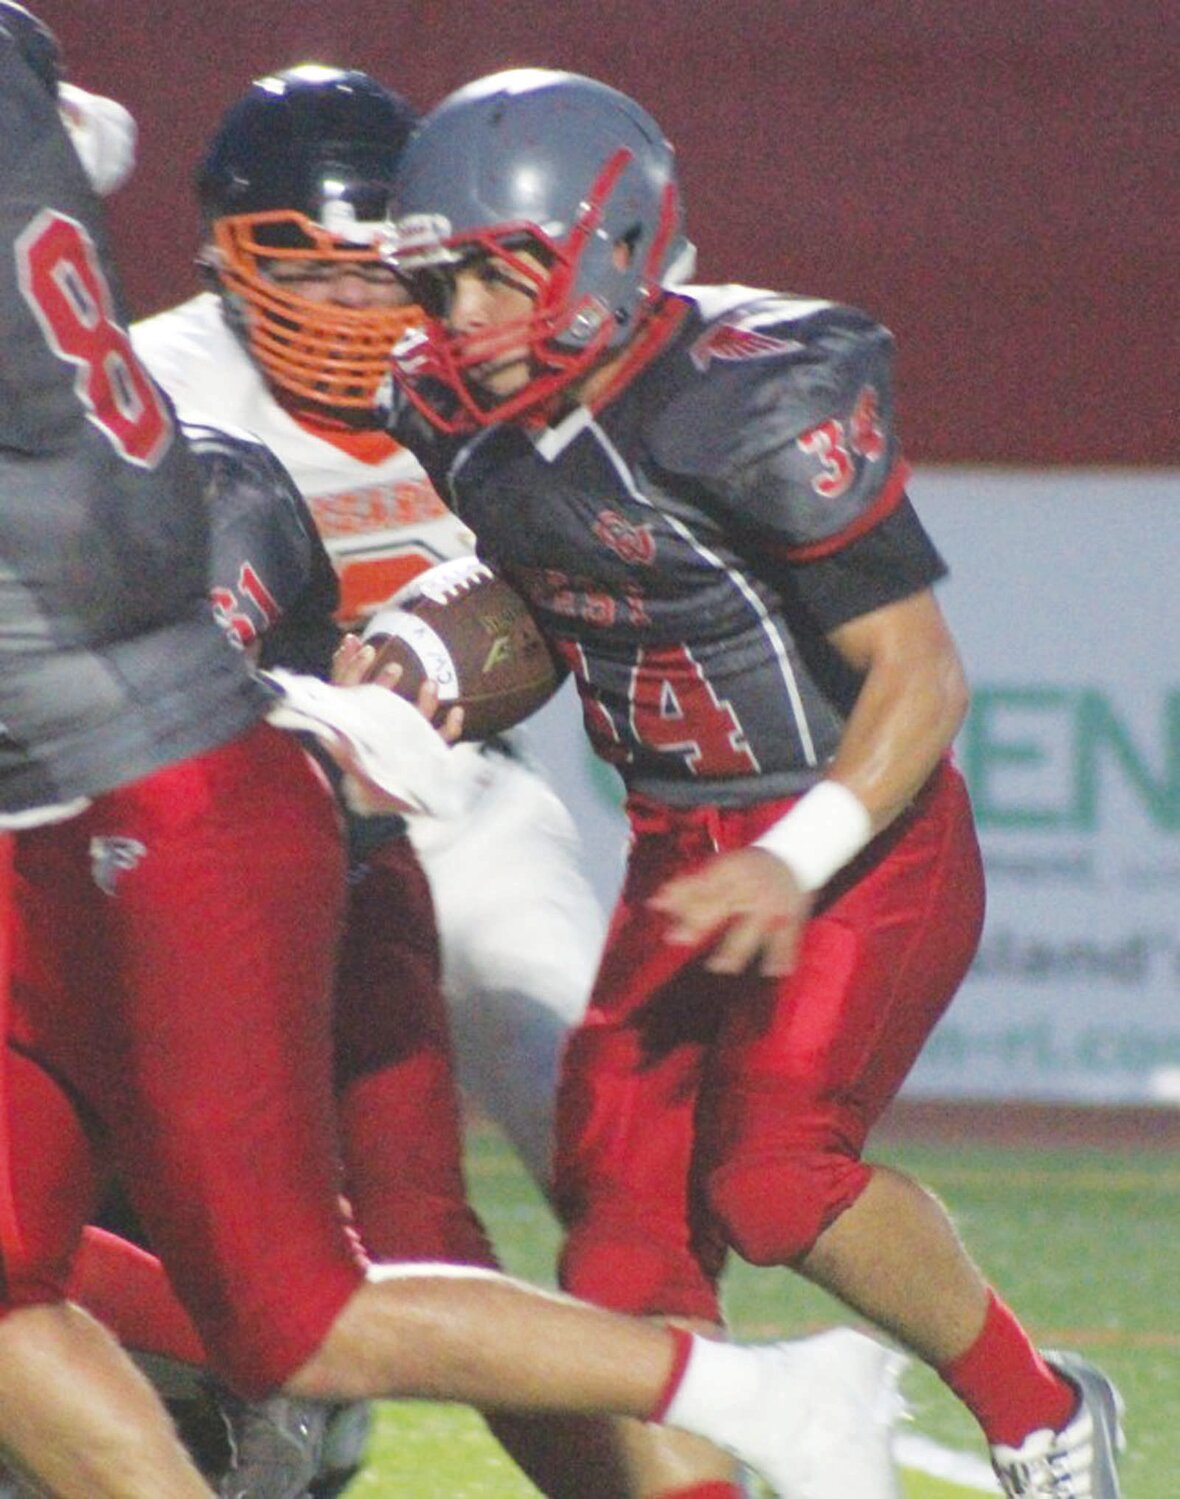 RUN IT DOWN YOUR THROAT: West running back David Boscia picks up some yards.